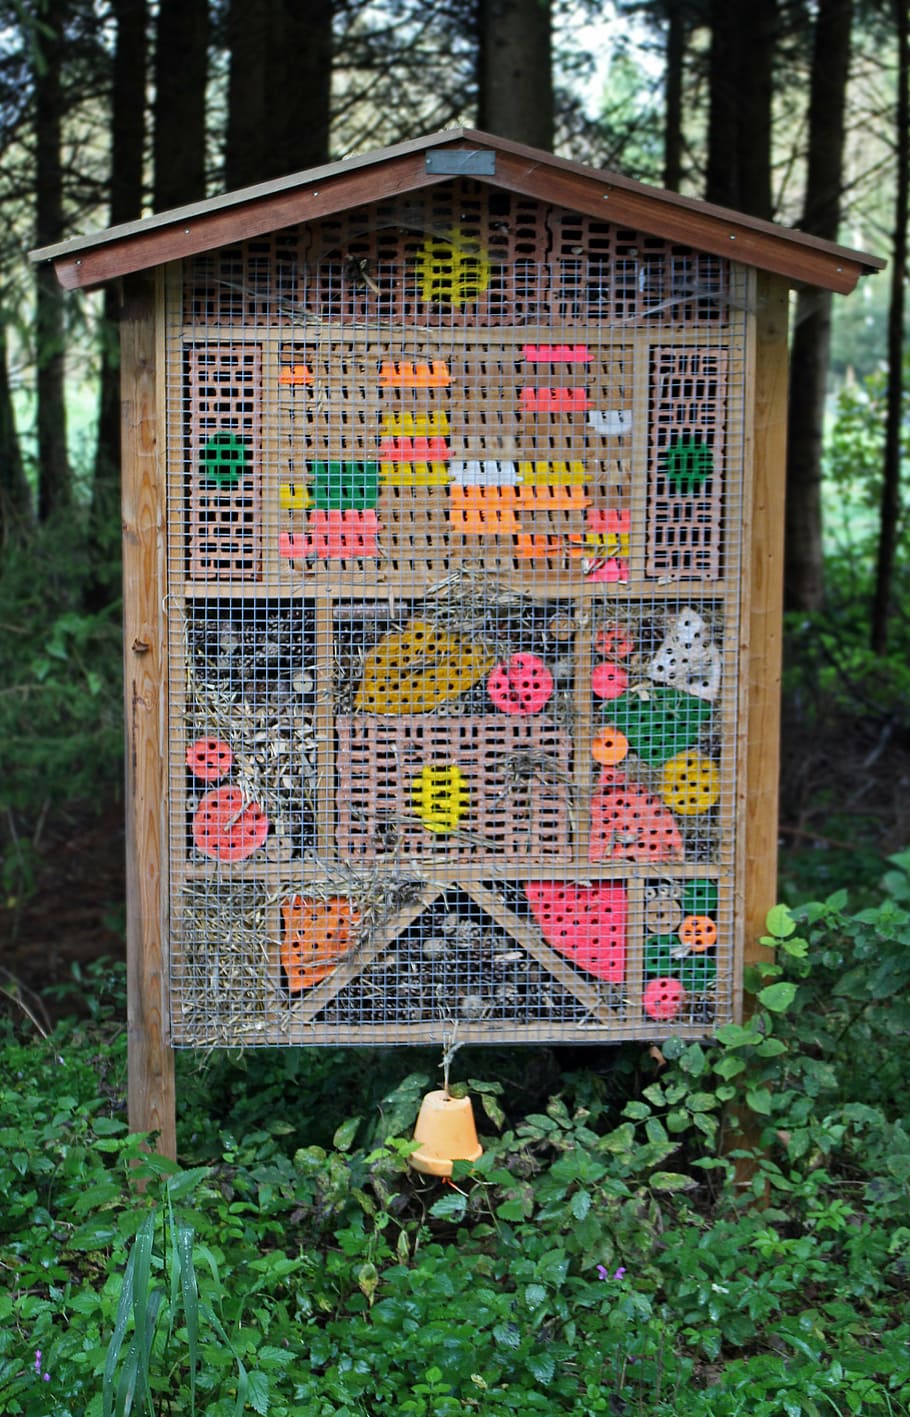 insect hotel, nesting help, wild bees, insect, bee hotel, wasps, school garden, breeding help, nature, animals